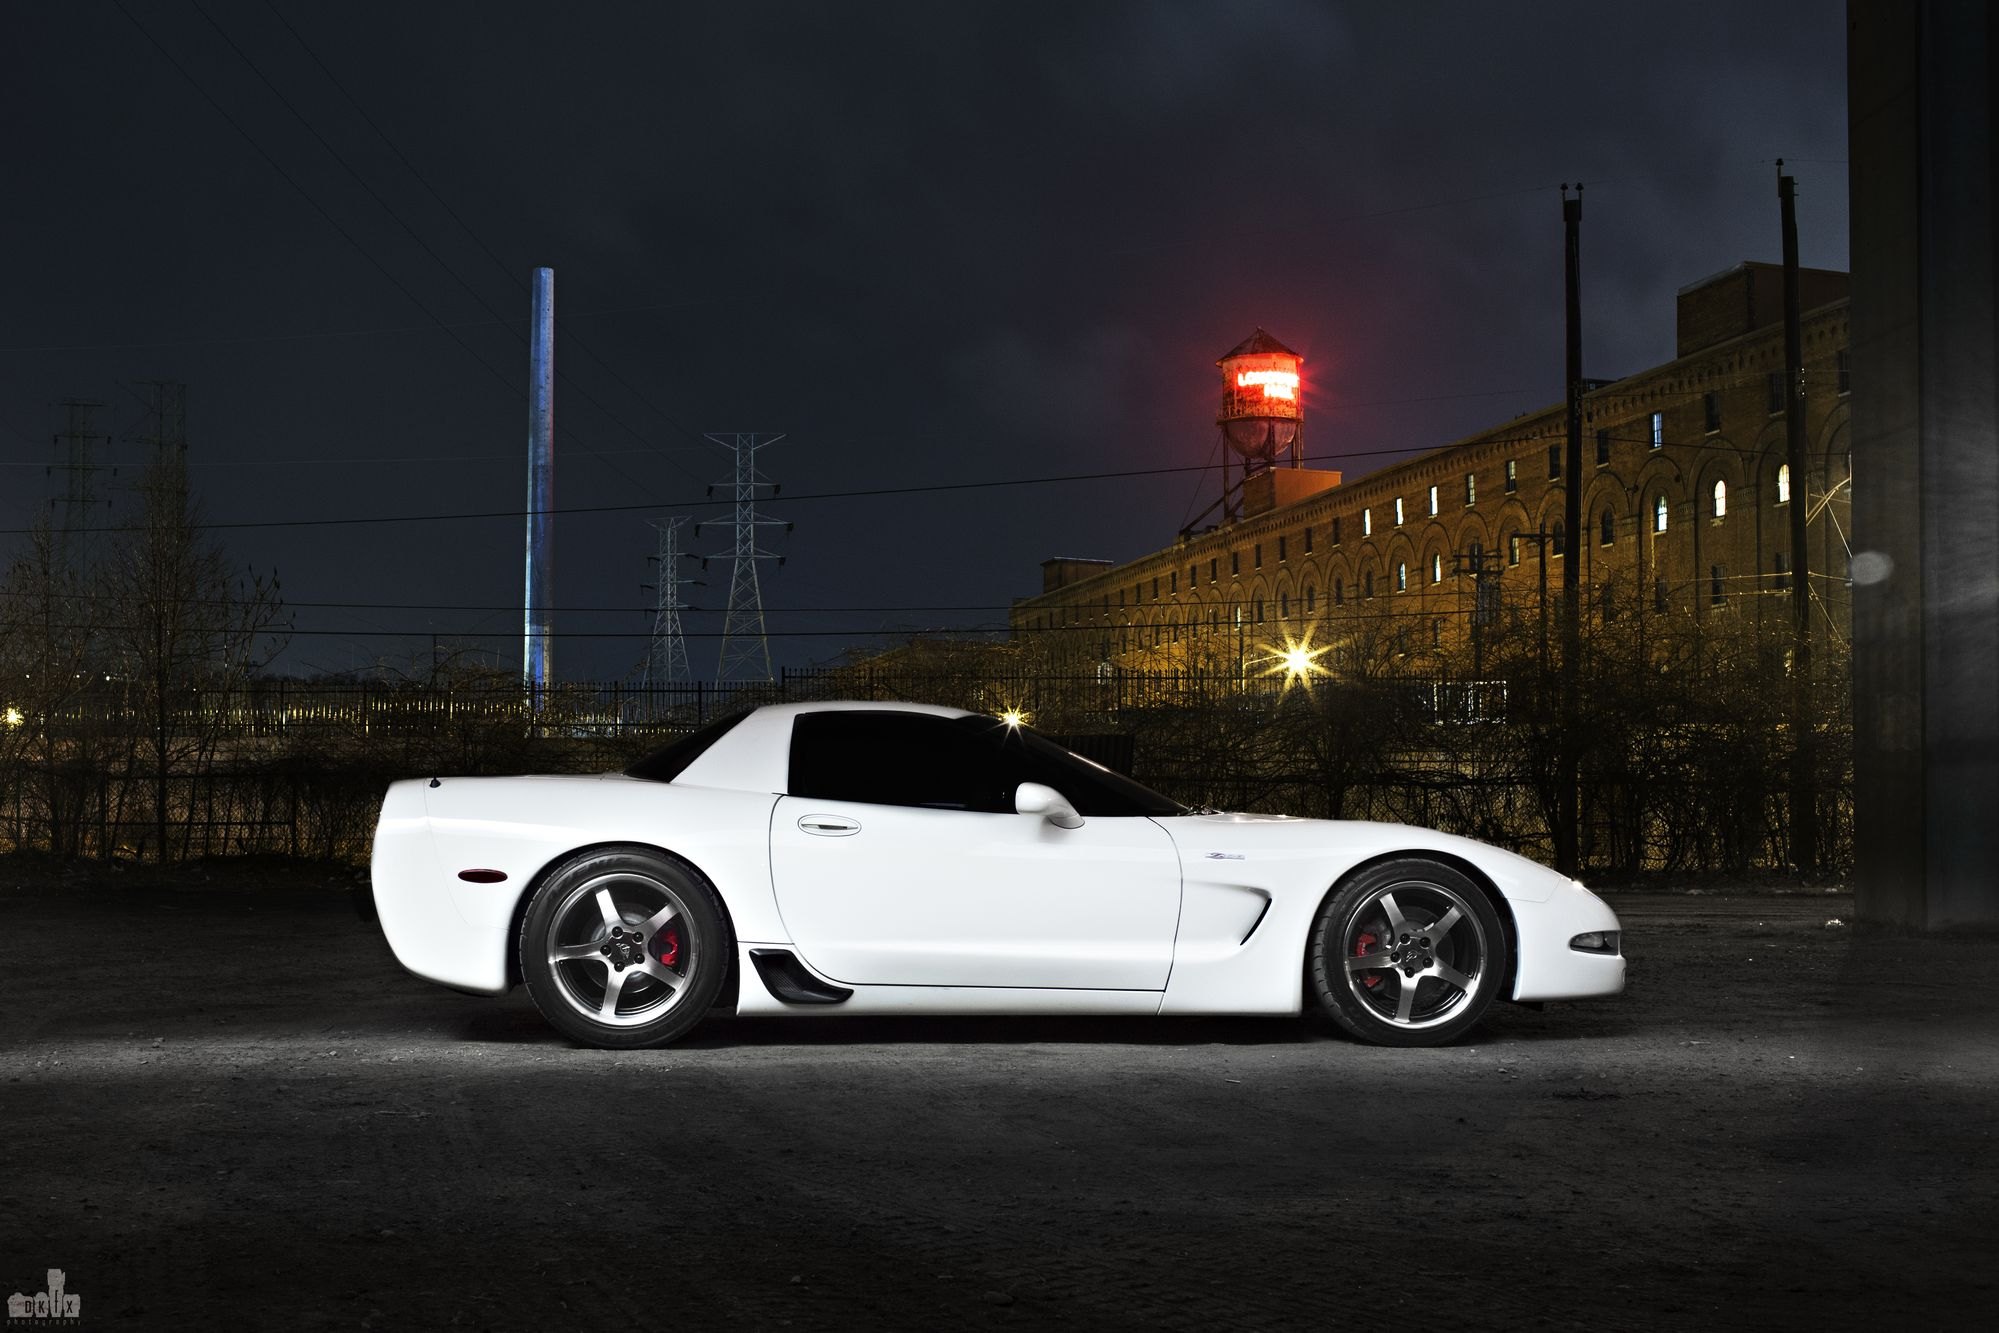 Aftermarket Side Scoops on White Chevy Corvette - Photo by dan kinzie